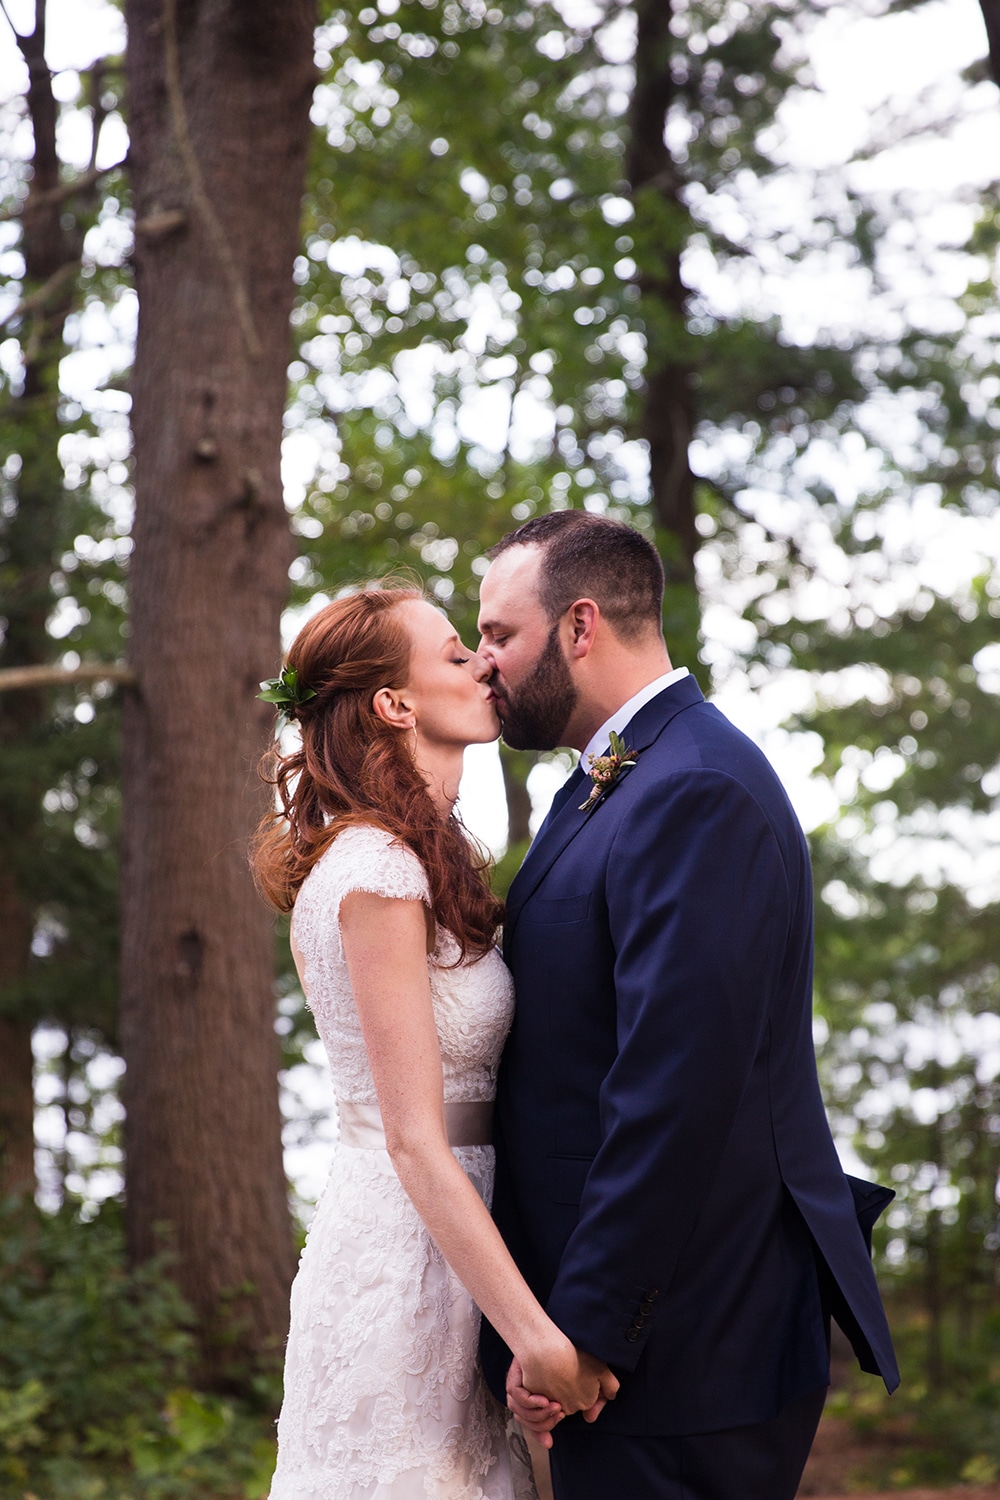 A sweet and natural portrait of a bride and groom kissing in the woods during their Kingsley Pines Camp wedding in Maine